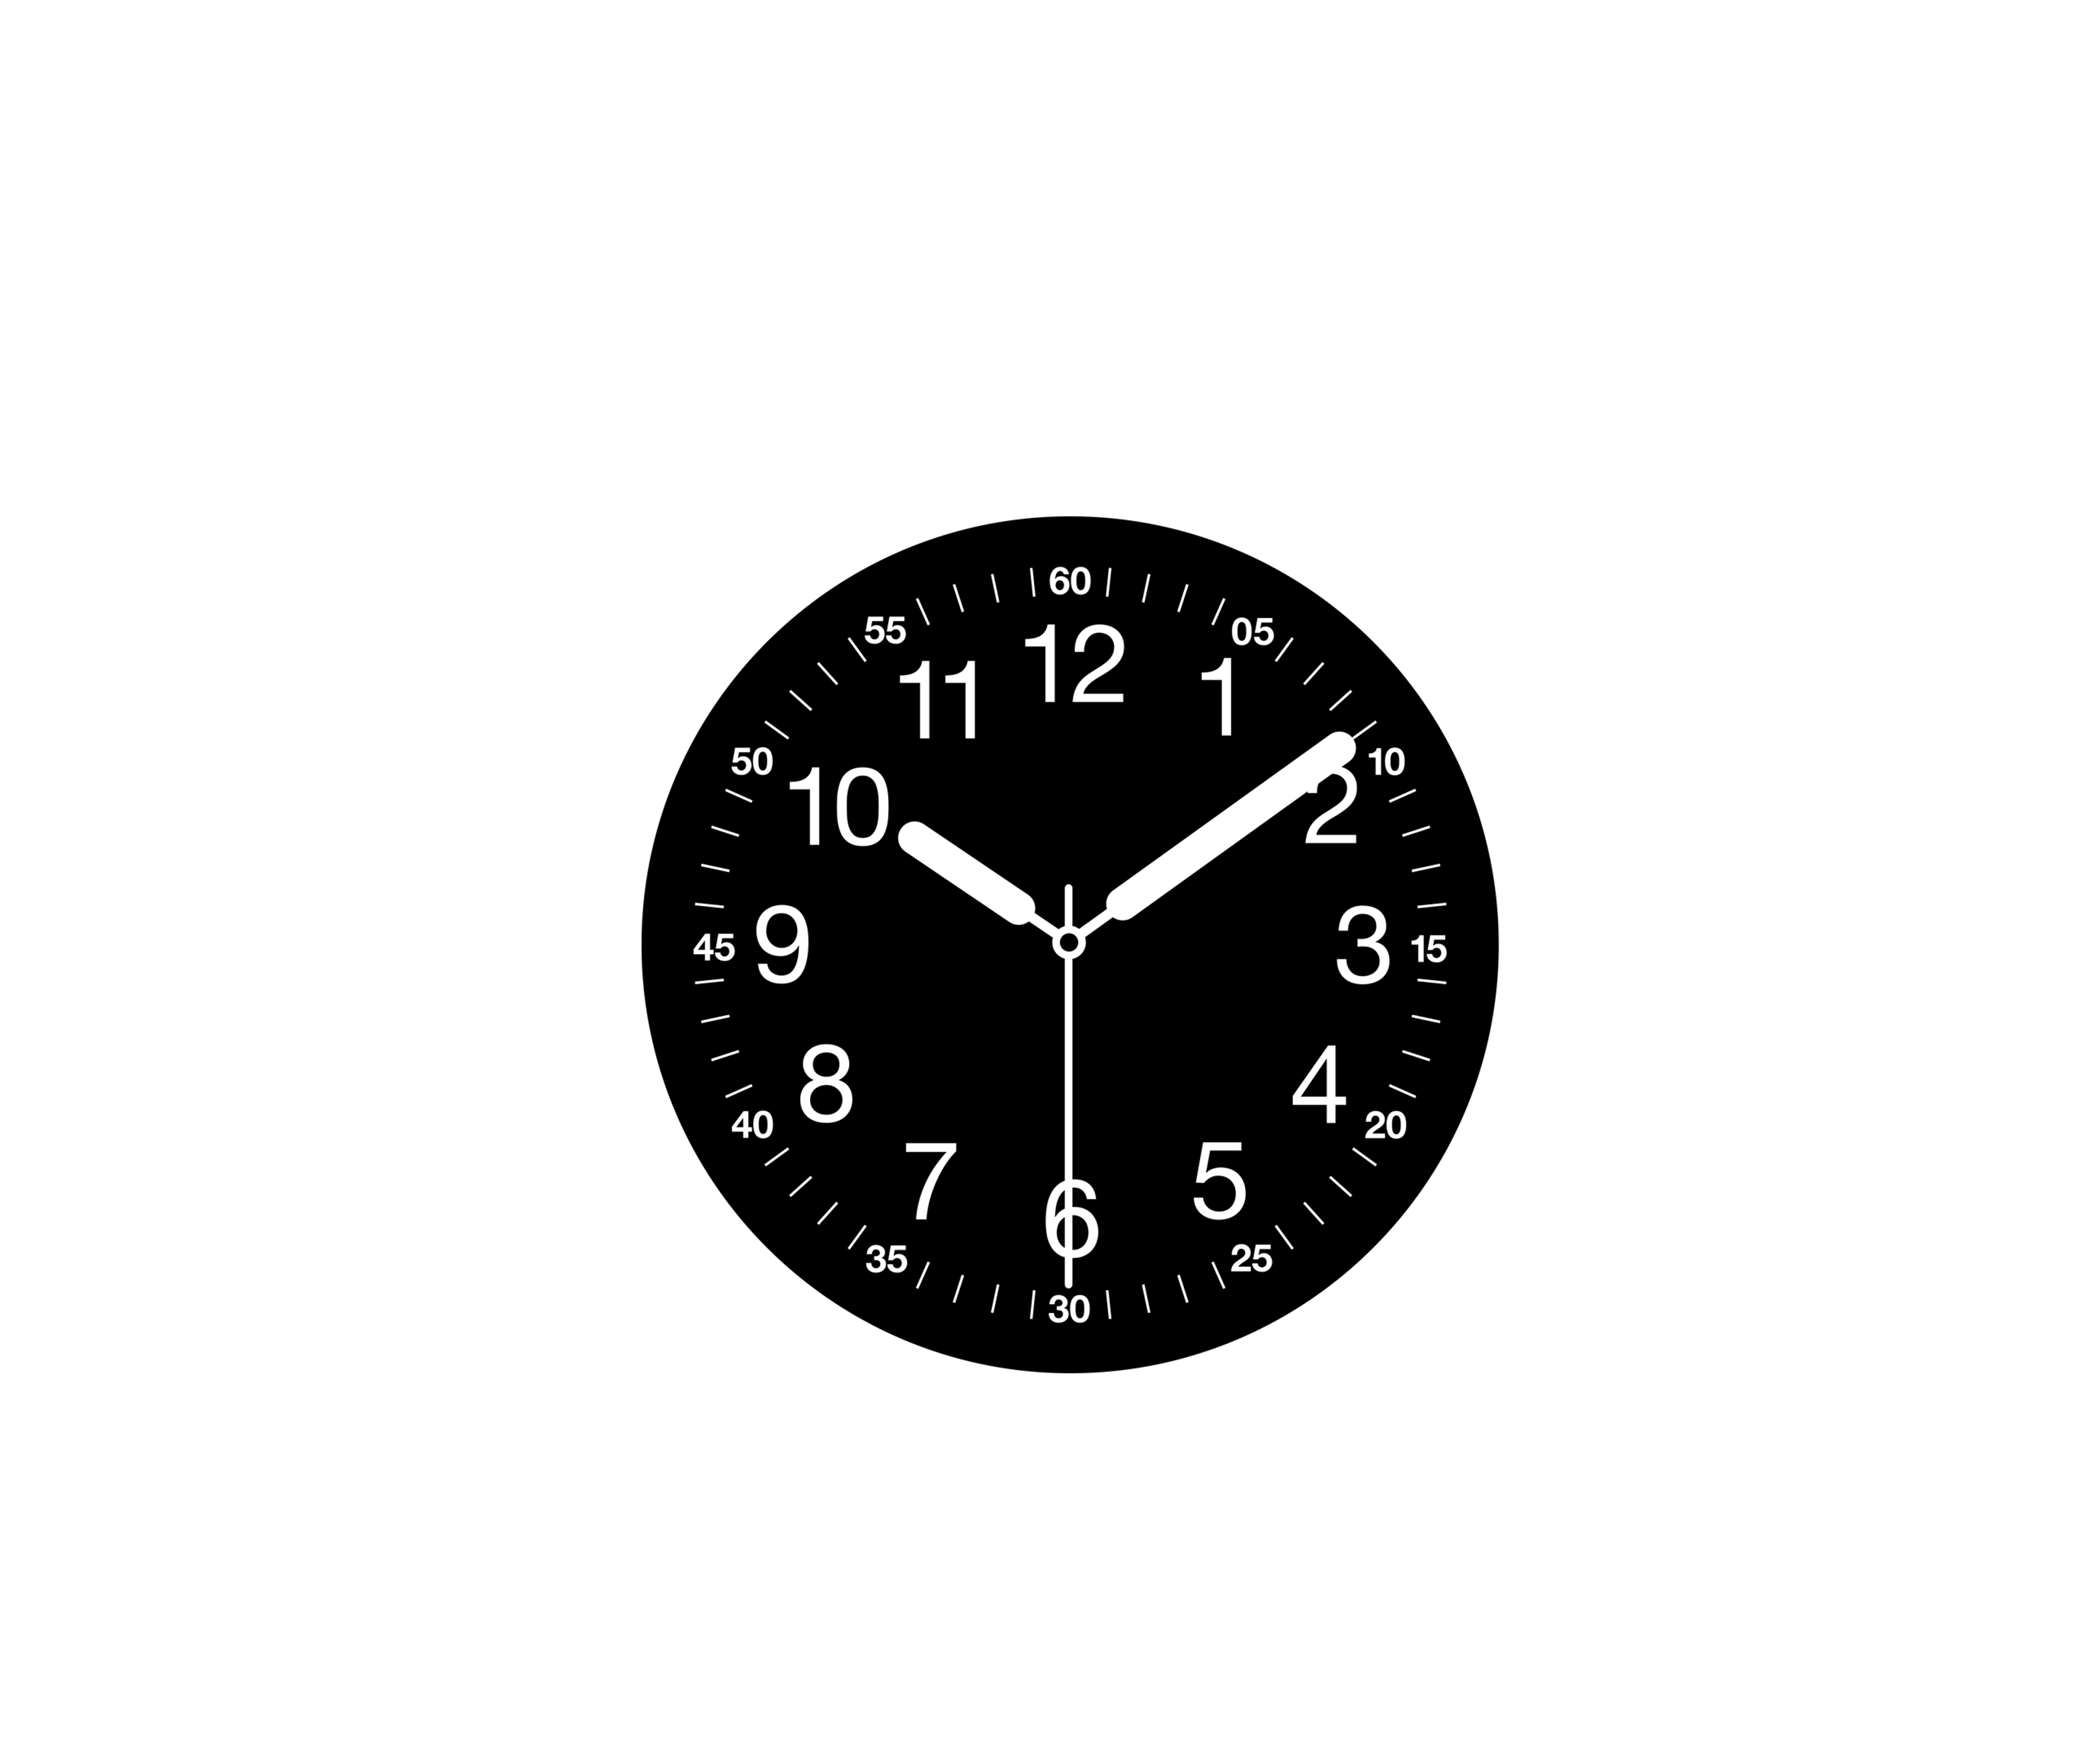 Black color illustration of wall clock showing 9 past 10.